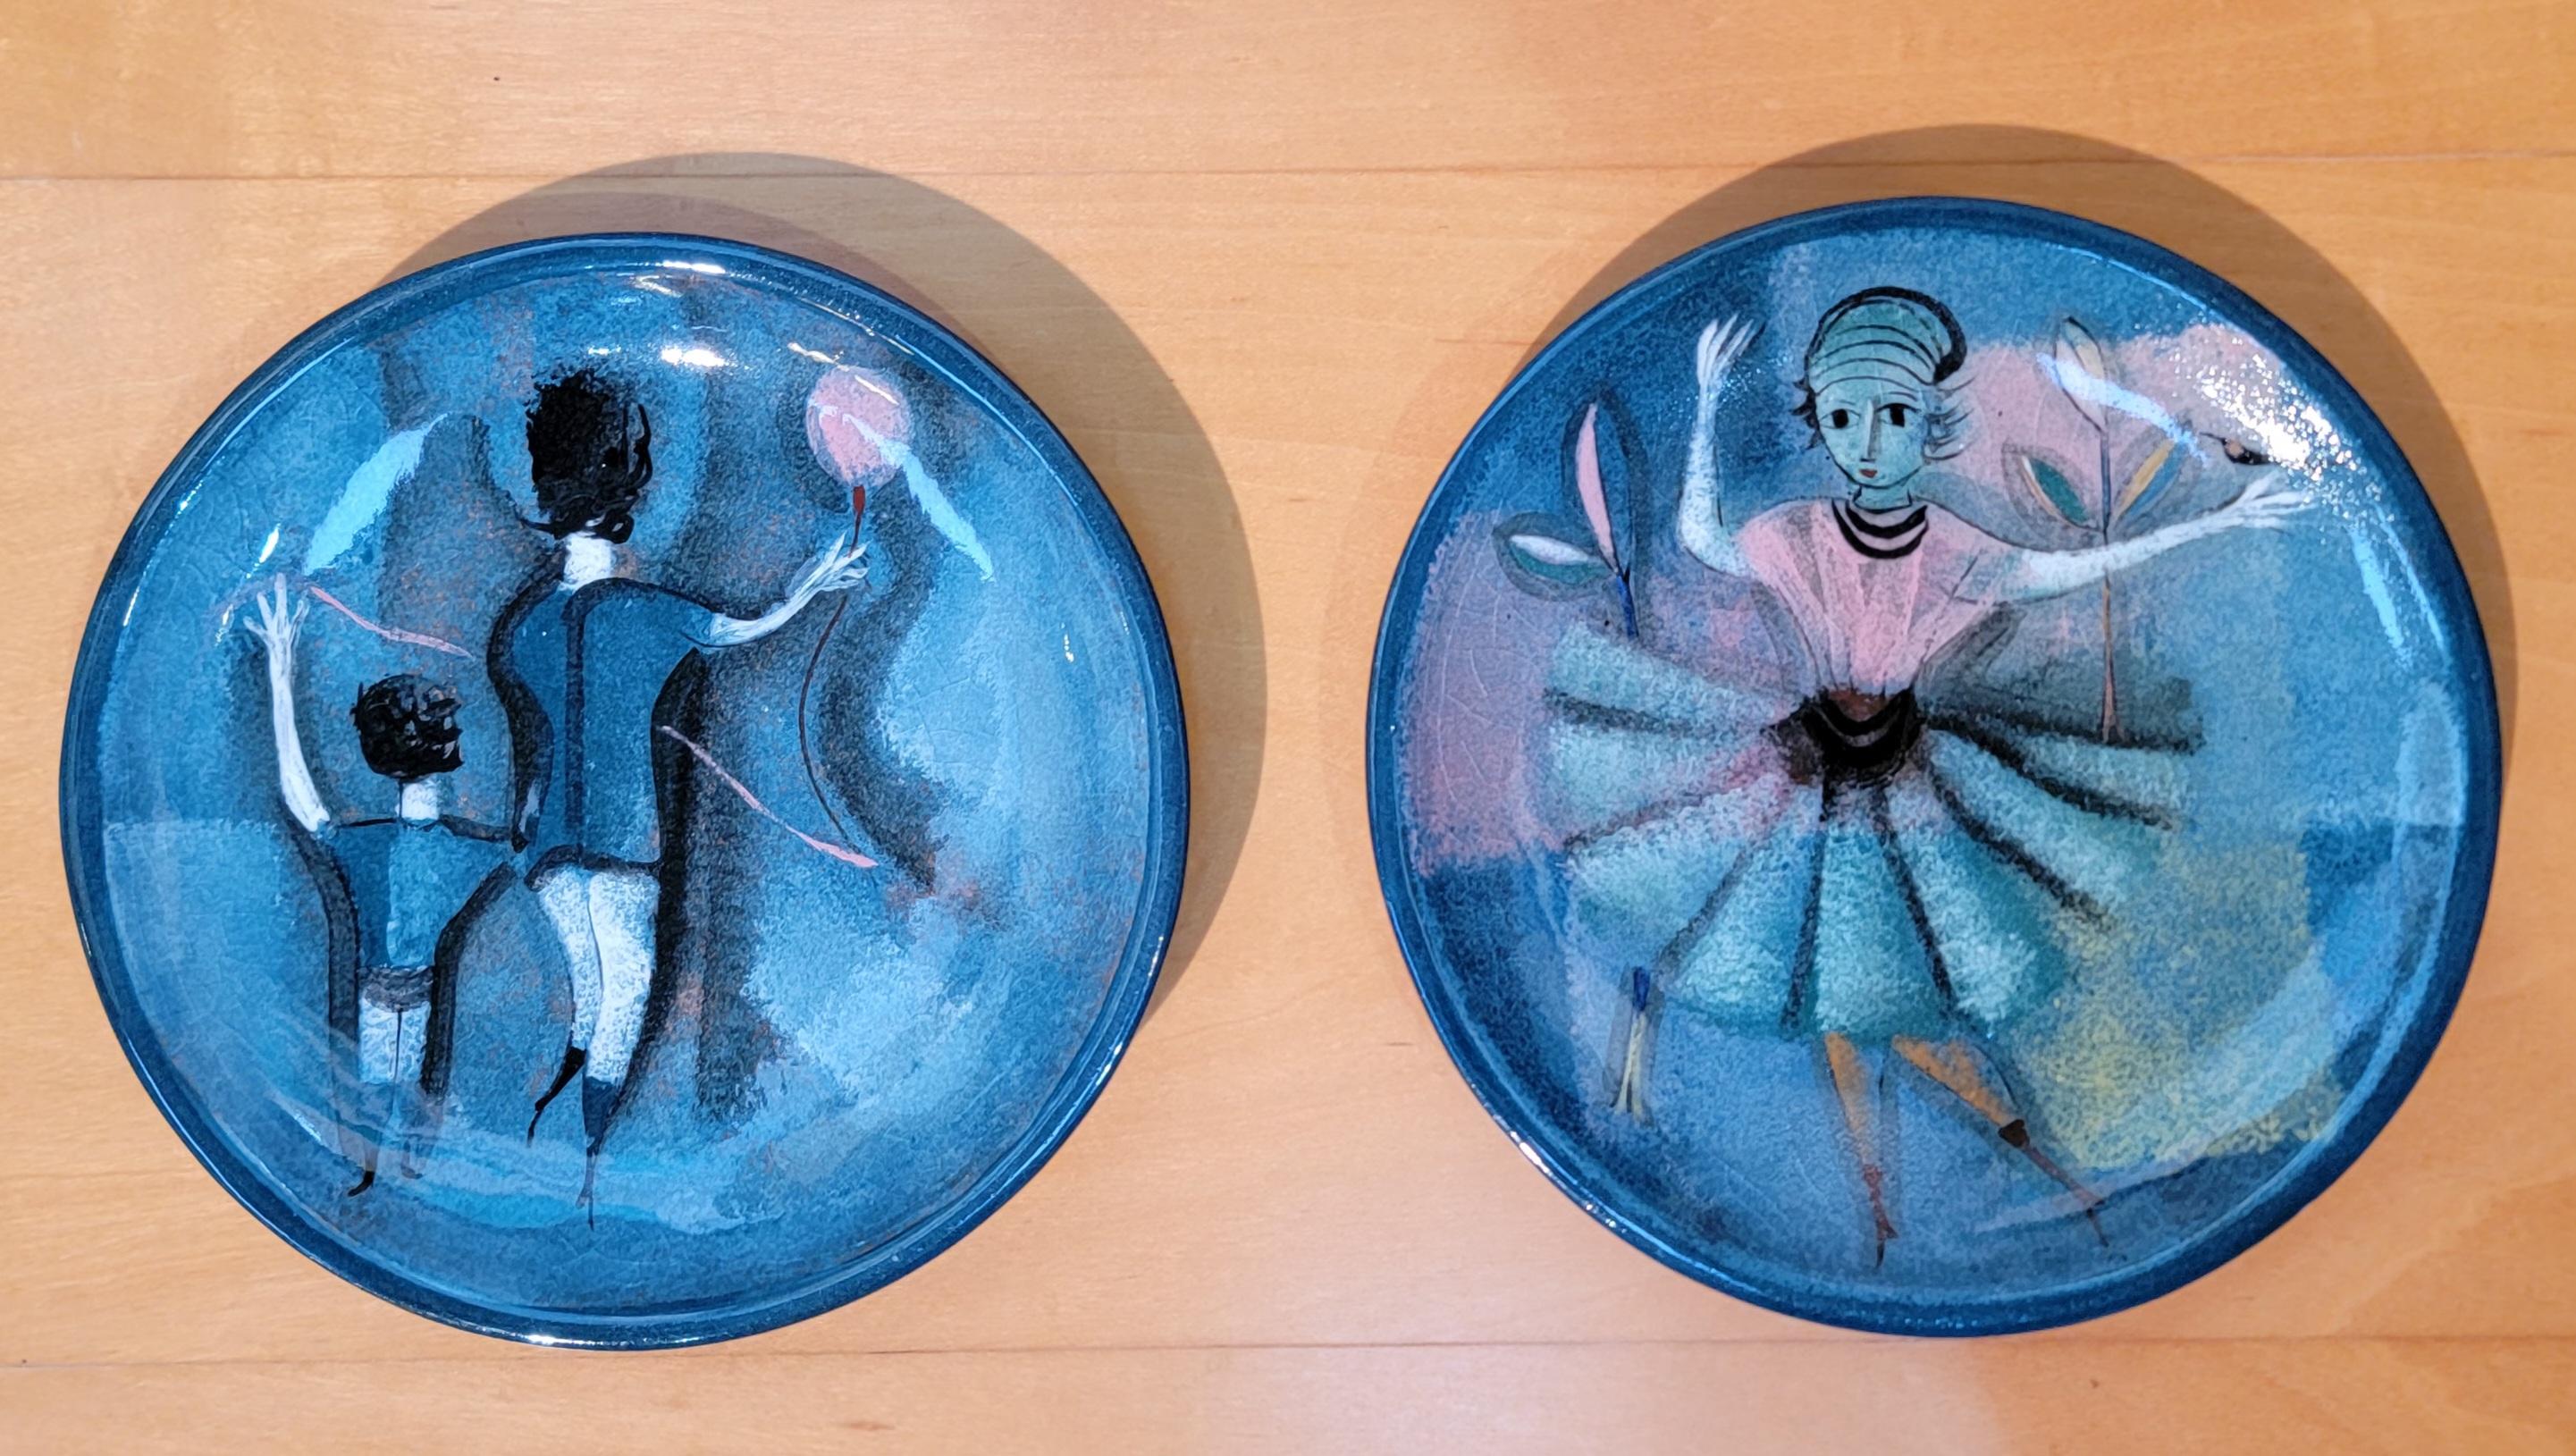 A pair or two Polia Pillin California Studio pottery plates. Excellent condition. Please excuse some glare in photographs.